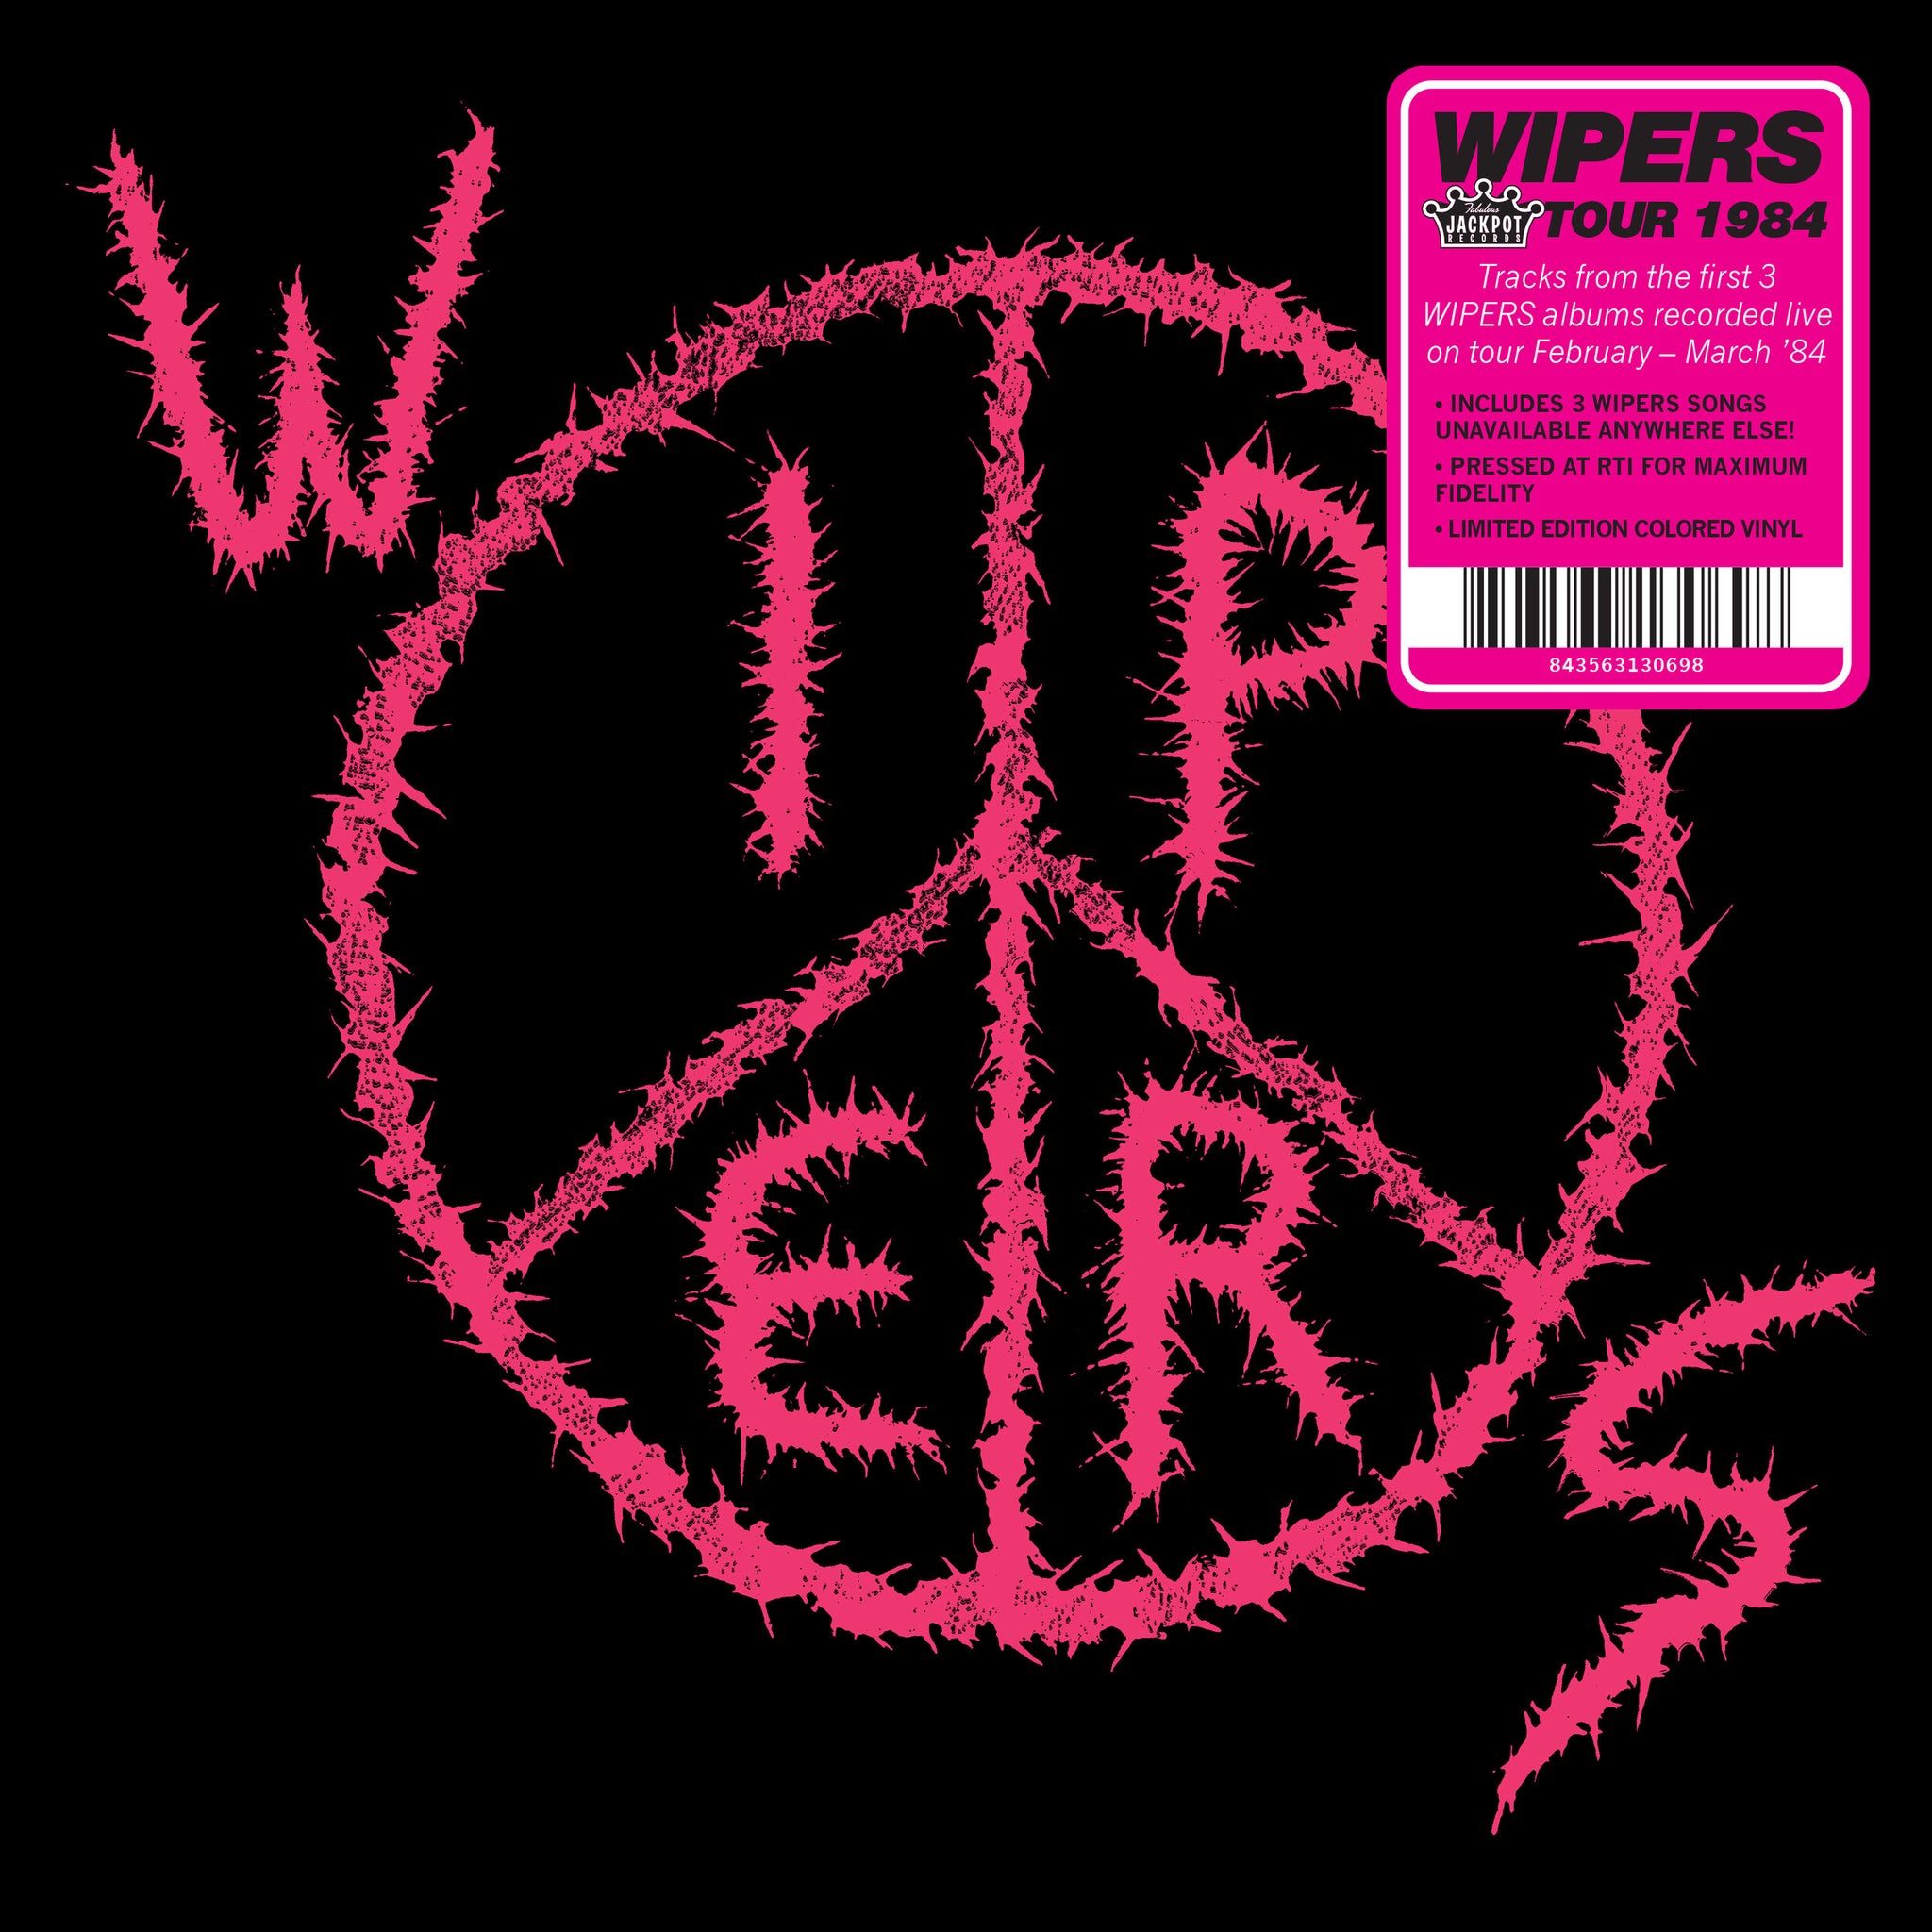 Wipers "Wipers (aka Wipers Tour 84)" Colored Vinyl LP